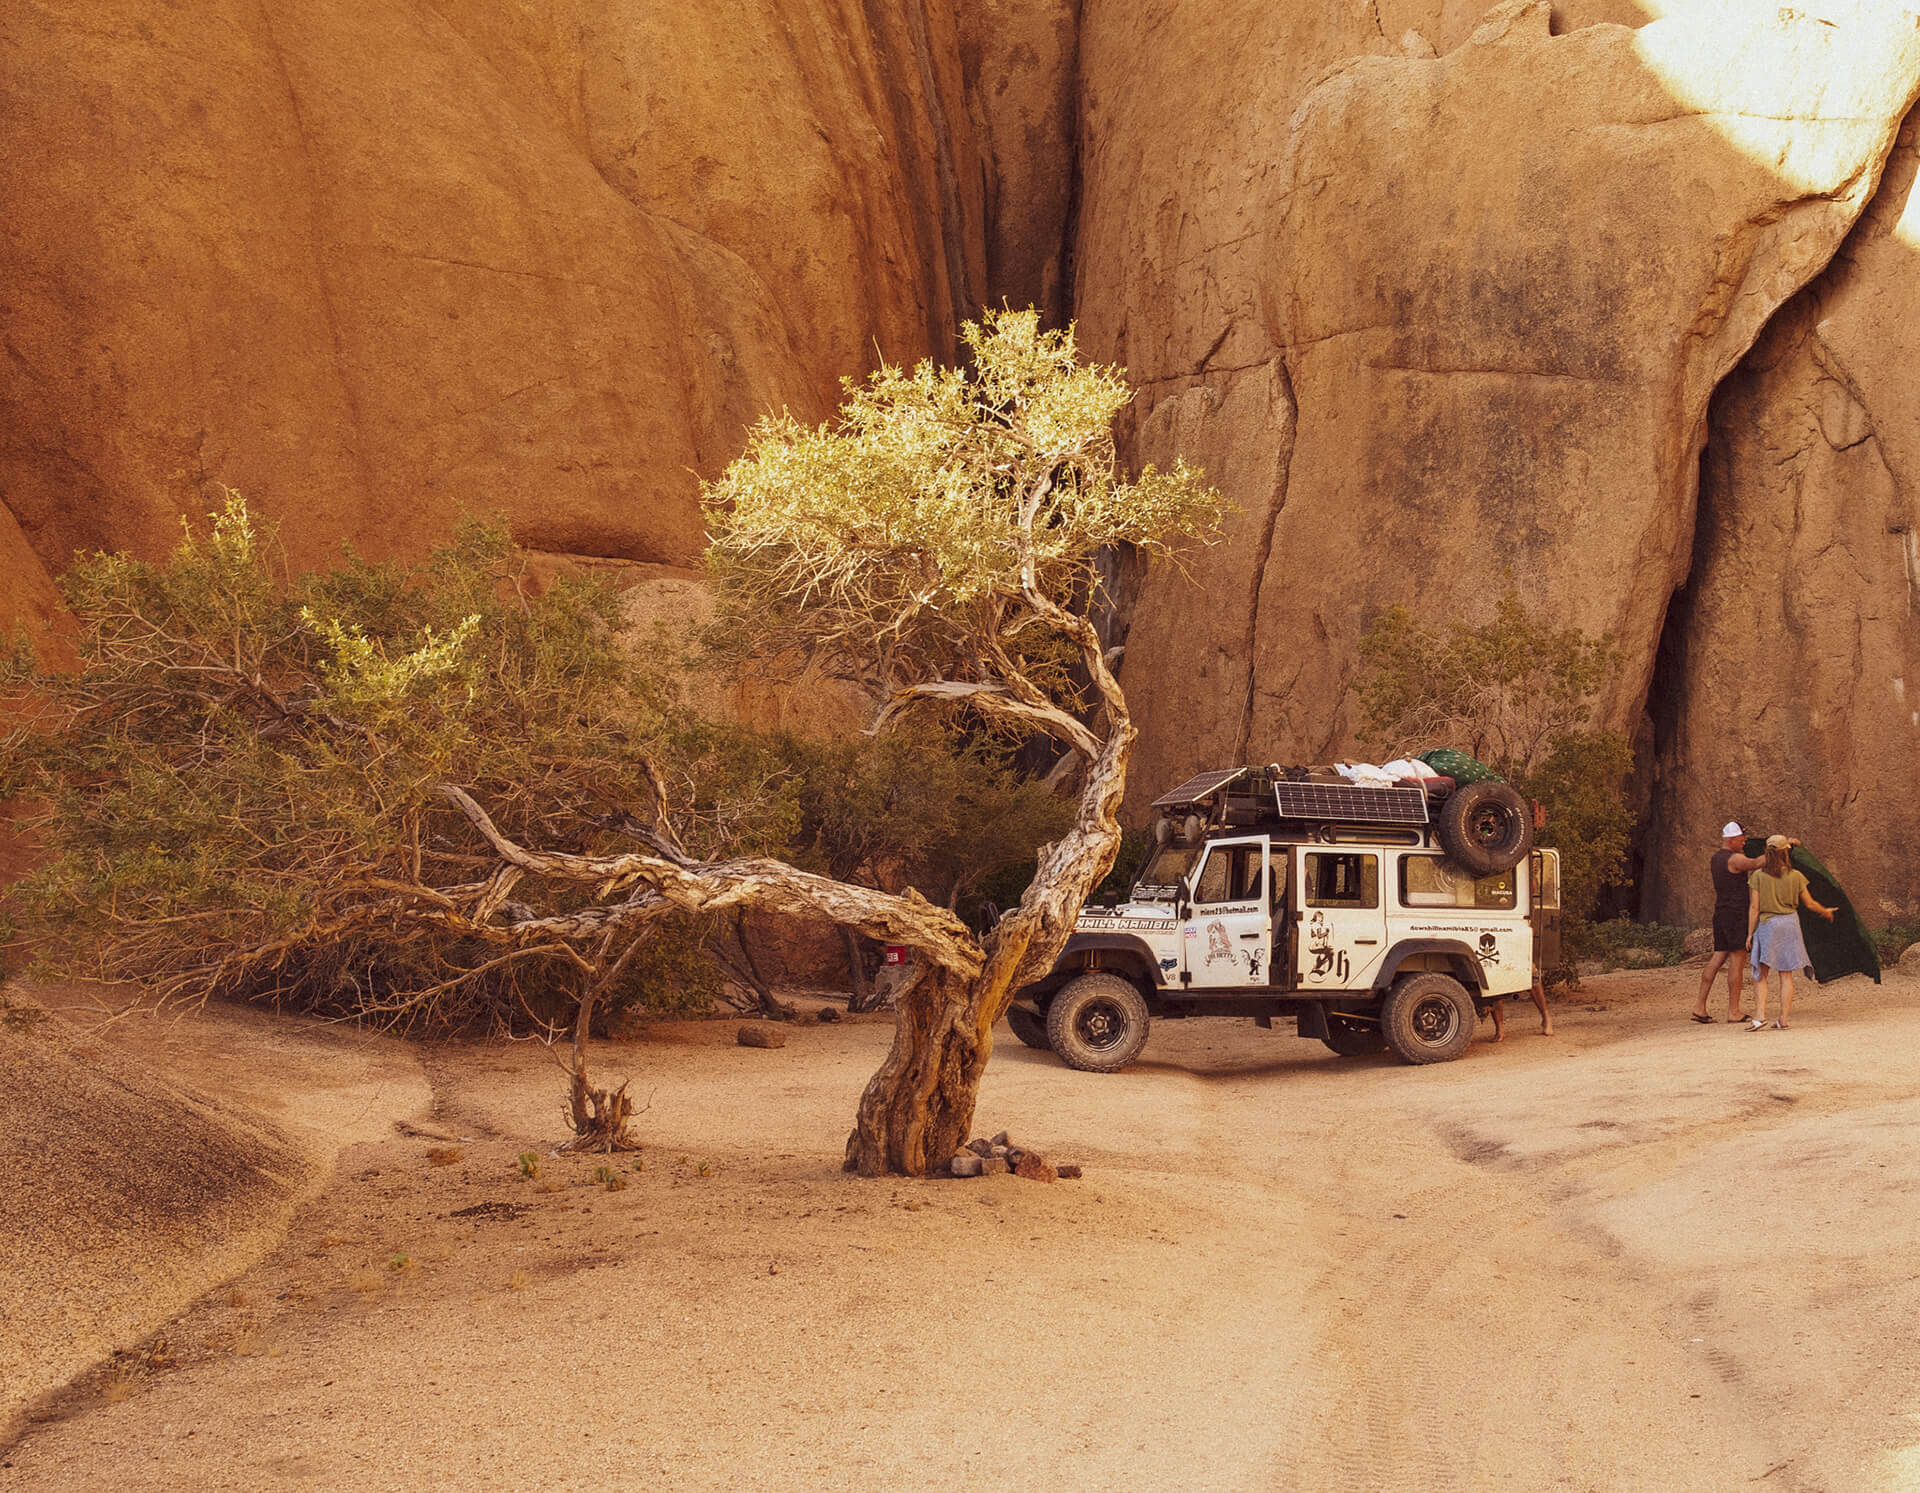 Campingsite at Spitzkoppe / Namibia